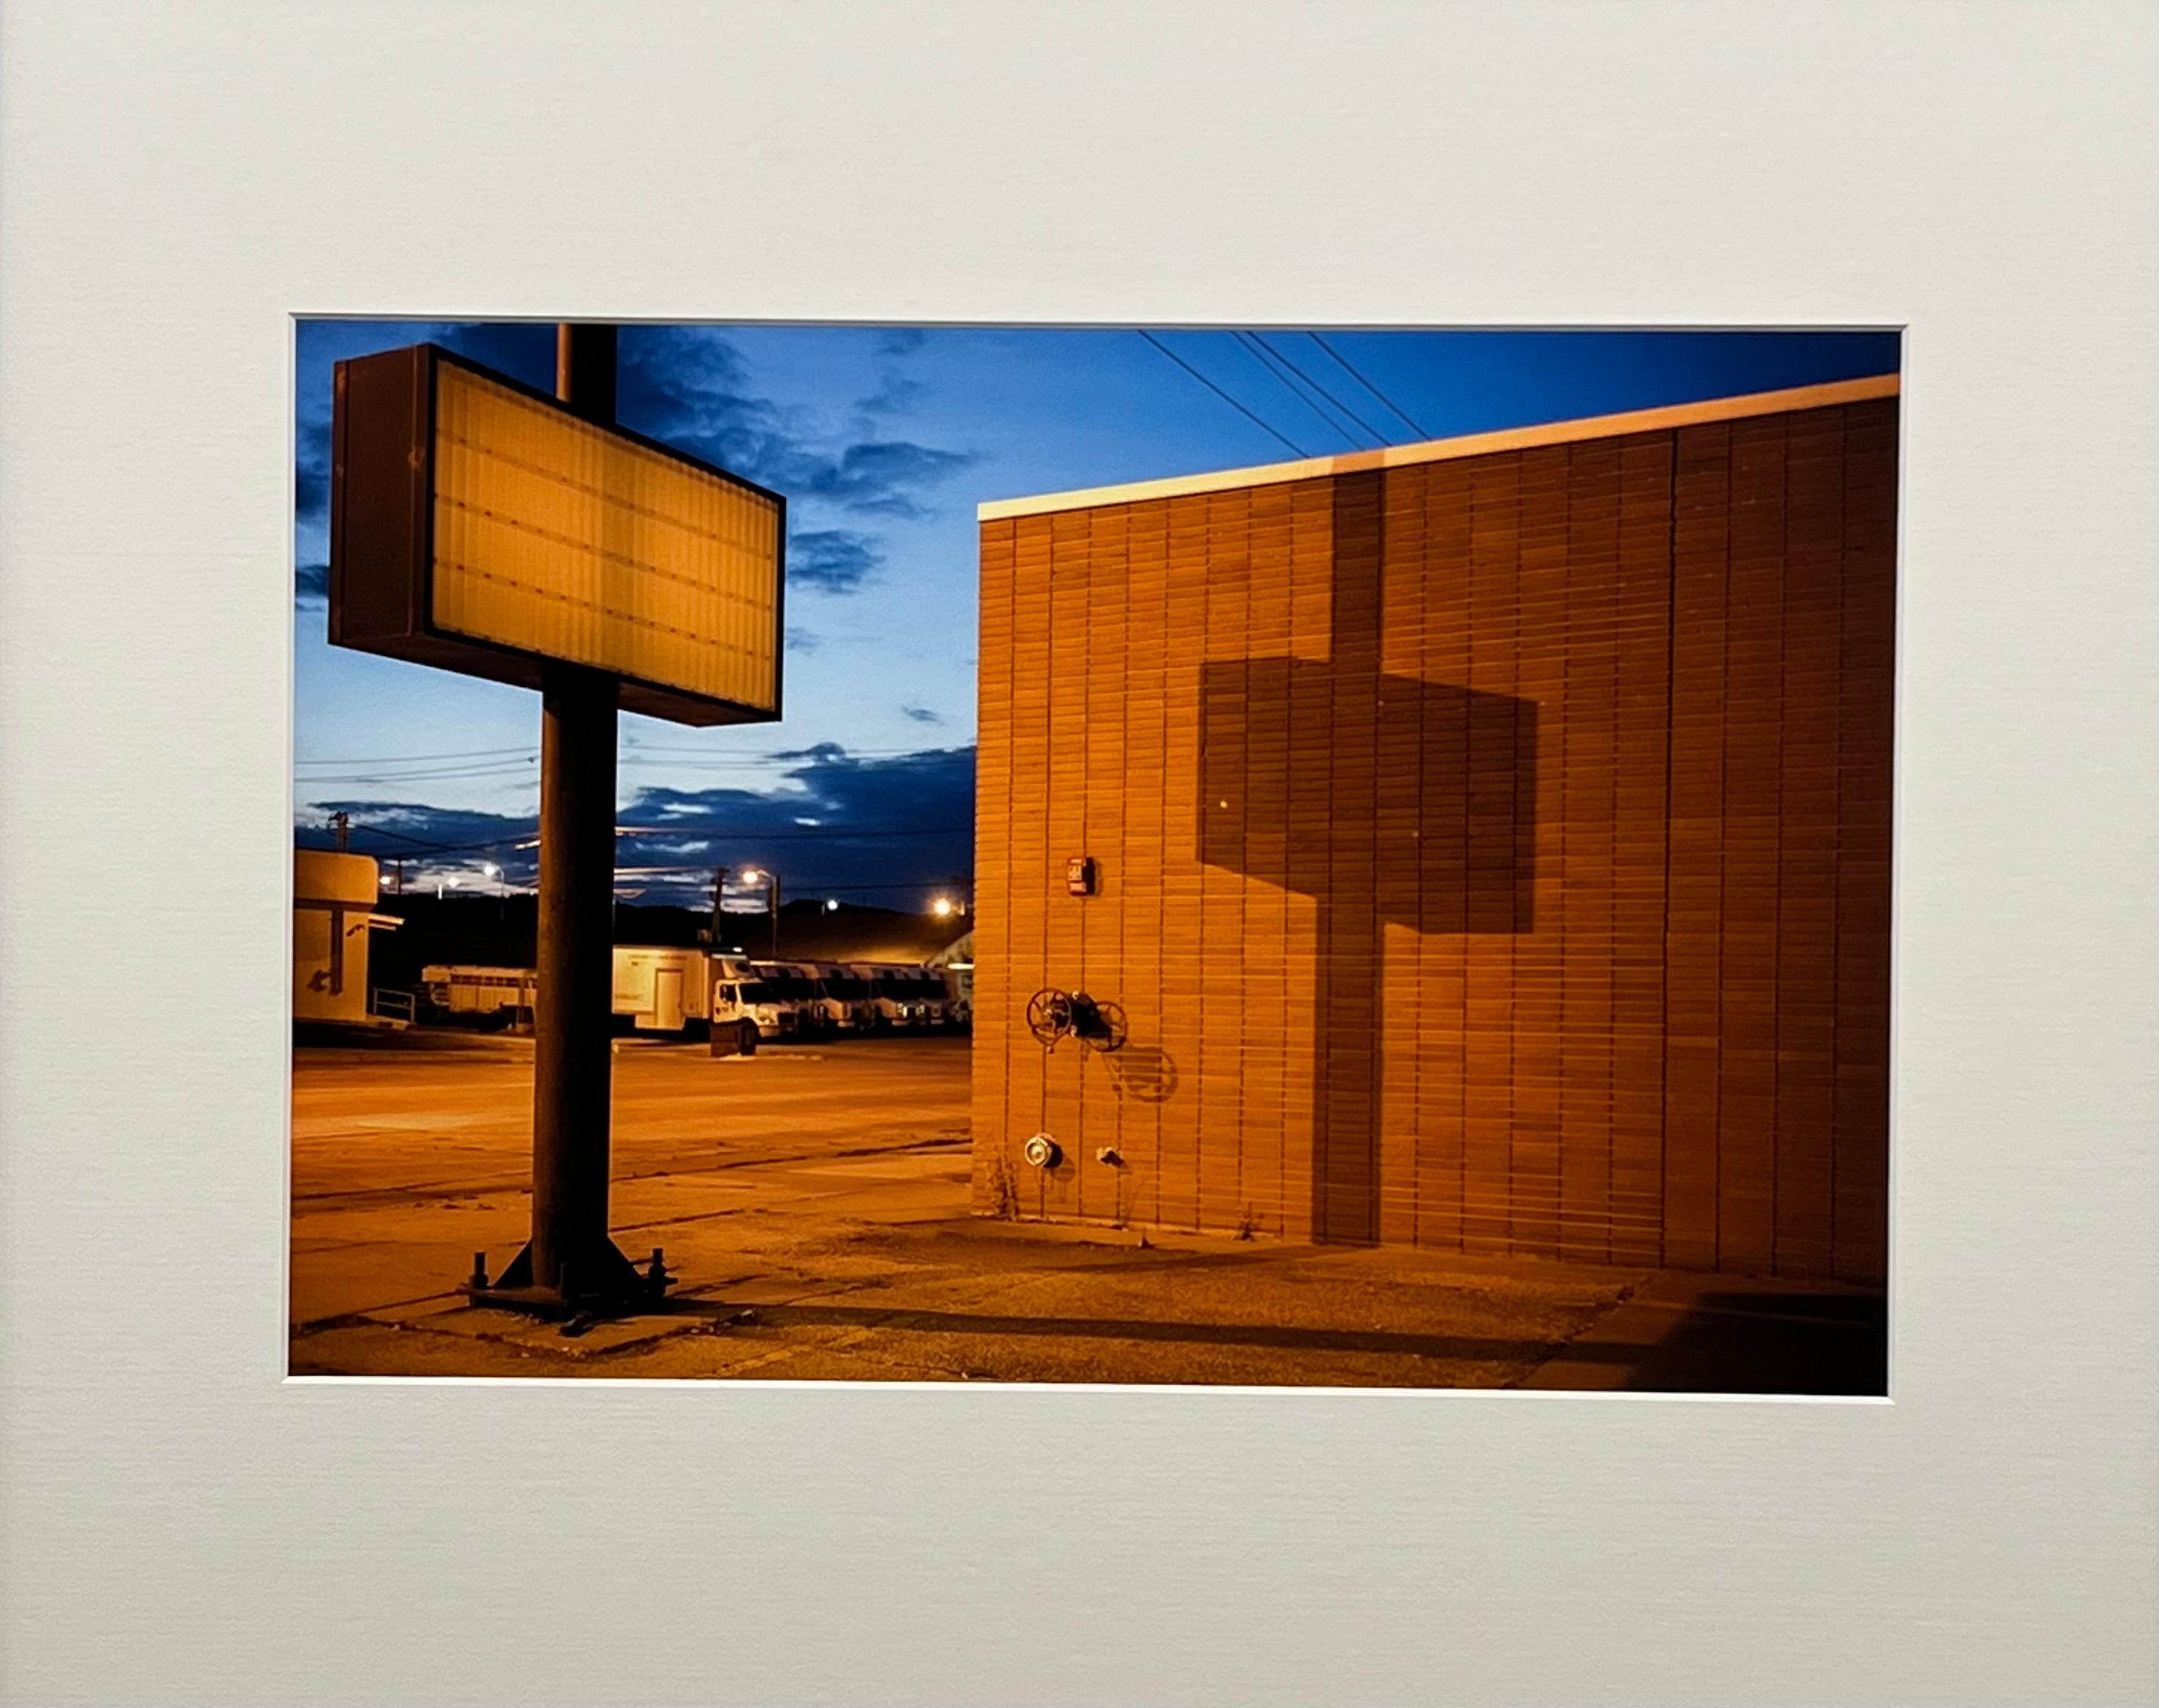 Nothing Else to Say, 2017, Rapid City, SD, USA - Contemporary Photograph by Philippe Blayo